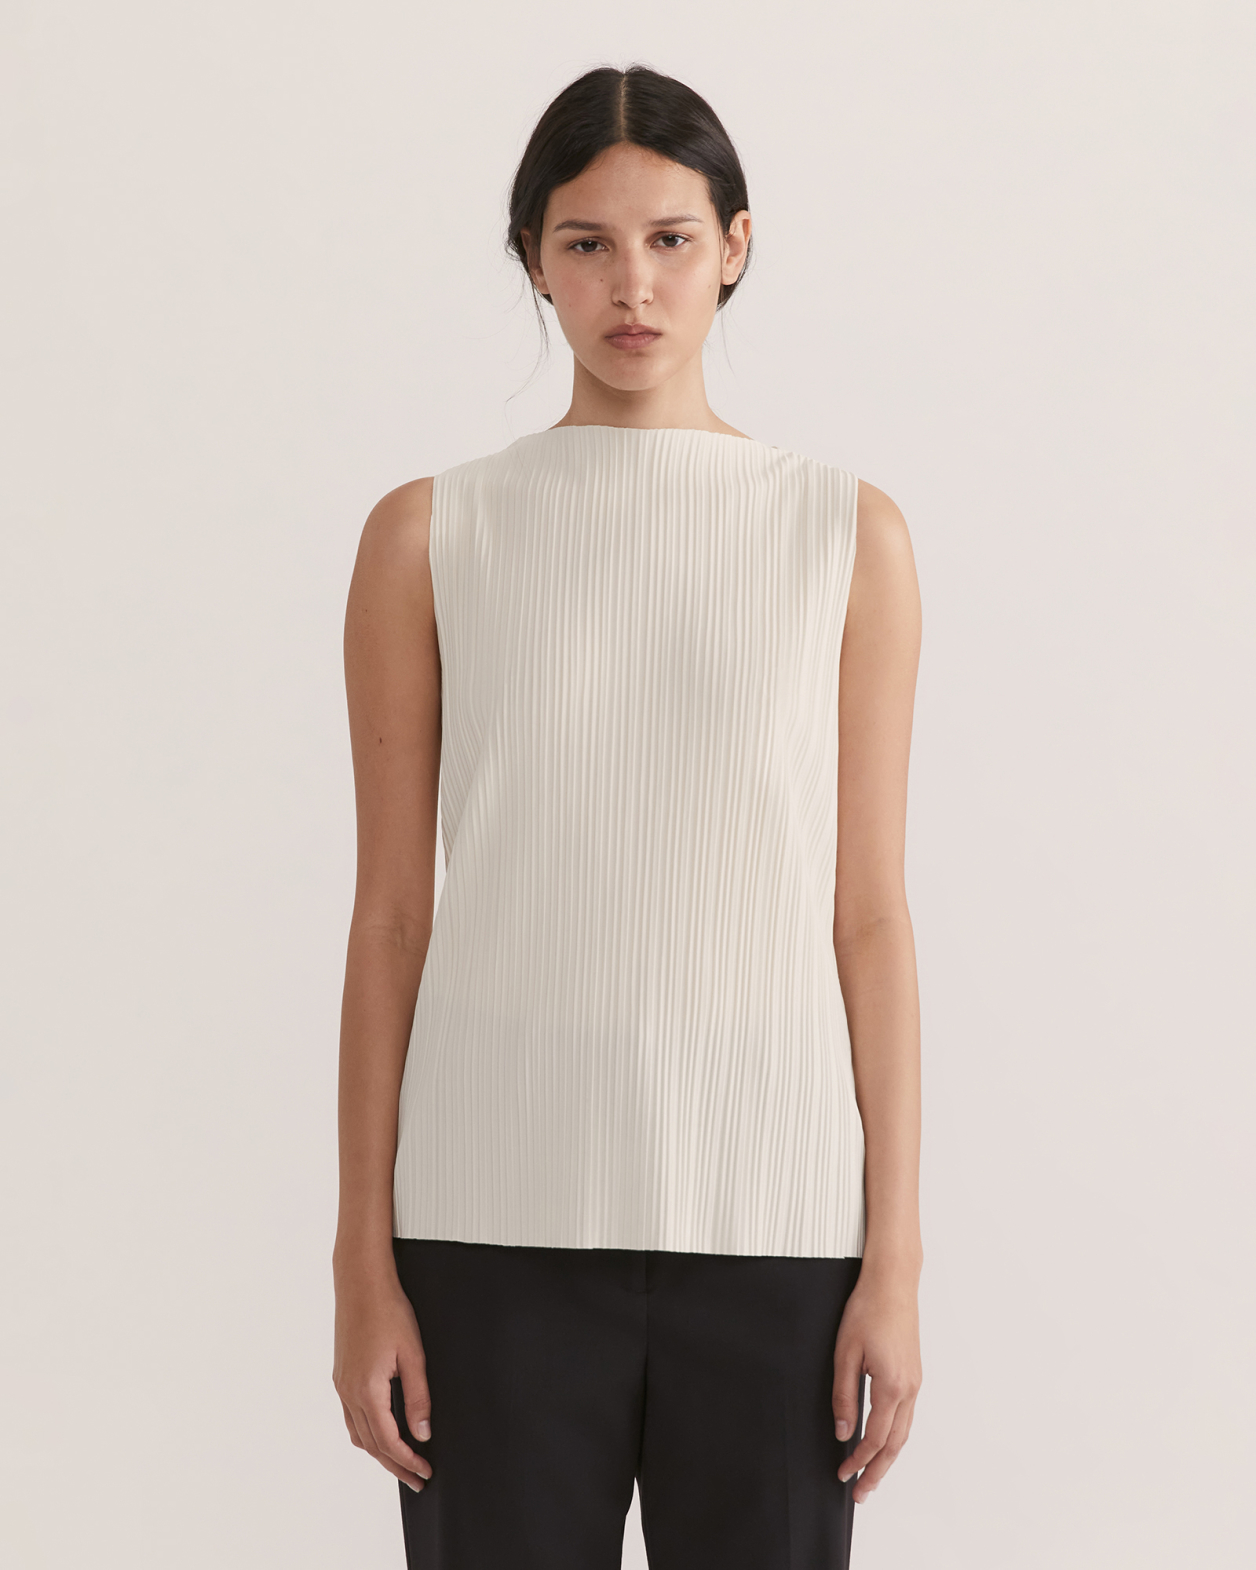 Leona Shell Top in IVORY